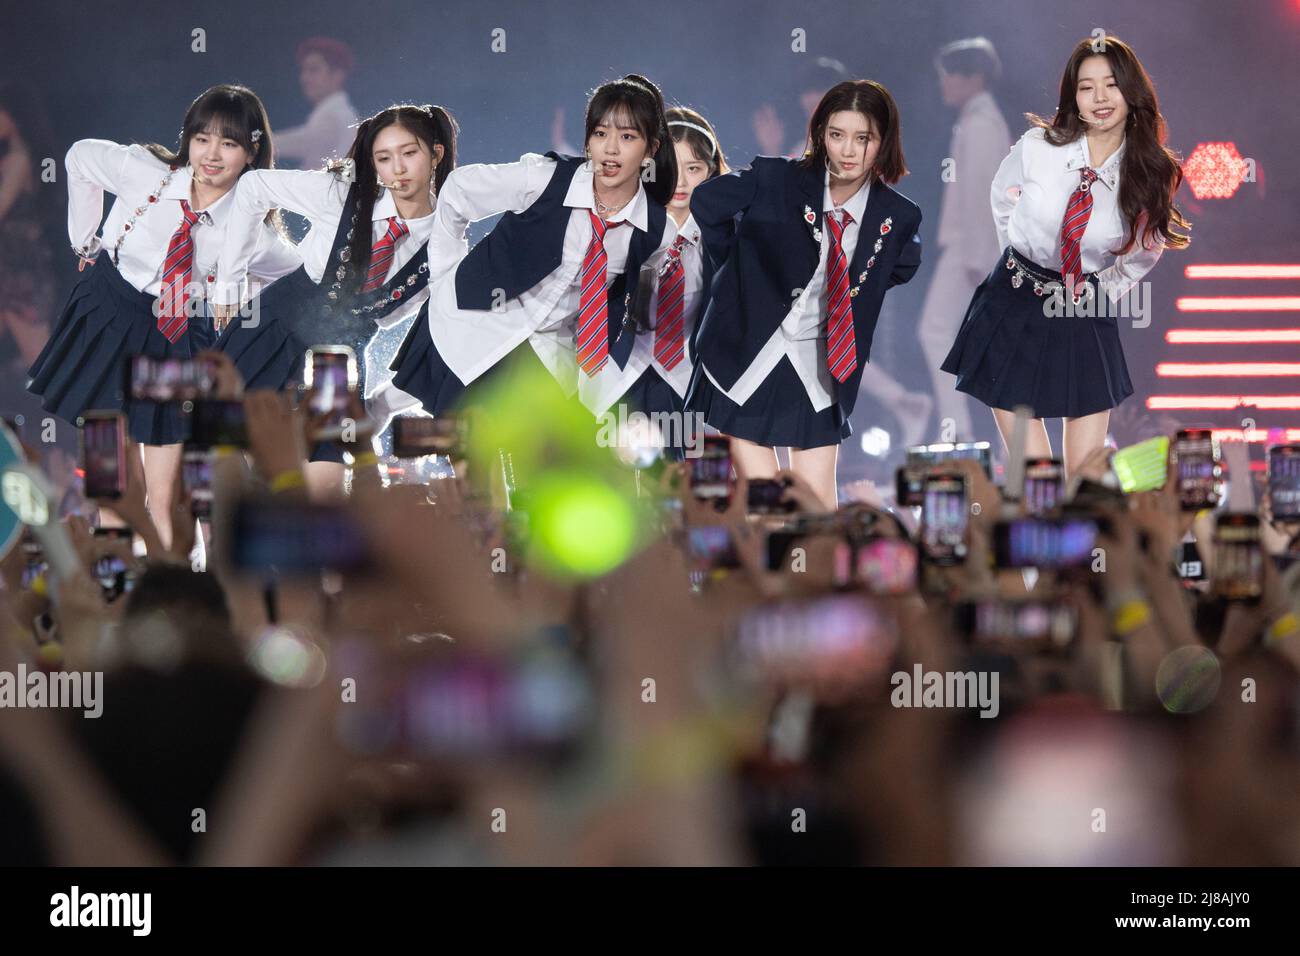 14 May 2022, Hessen, Frankfurt/Main: The band Ive performs on stage during the K-Pop mega festival 'KPOP.FLEX' at Deutsche Bank Park. This is the biggest K-pop festival with Korean pop music in Europe. Photo: Sebastian Gollnow/dpa Stock Photo